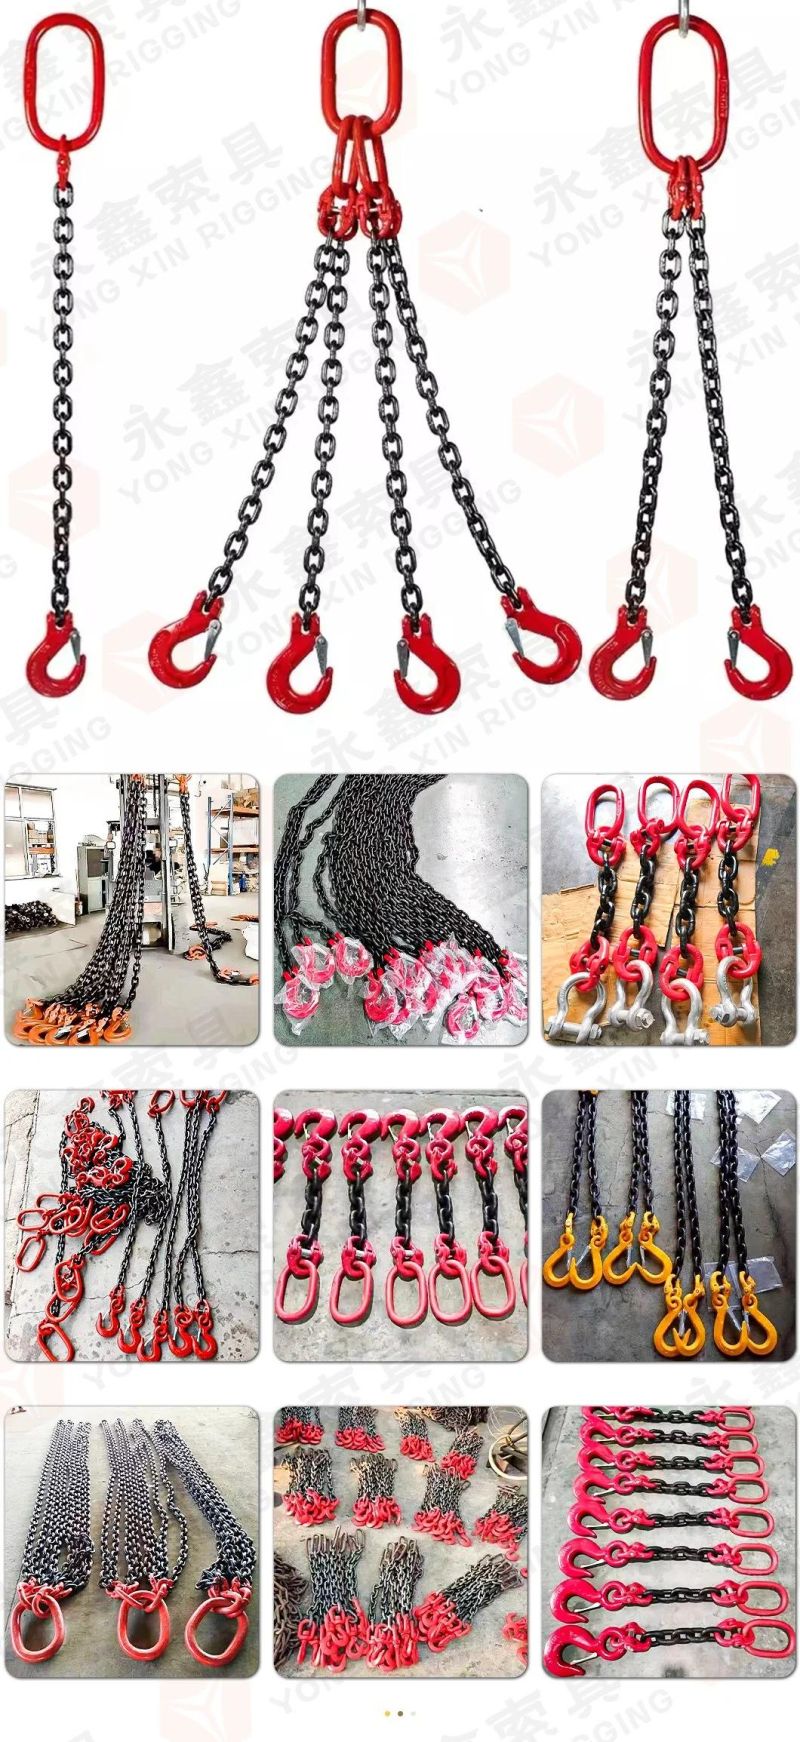 Us Type Grade 80 Transport Chain for Chain Sling